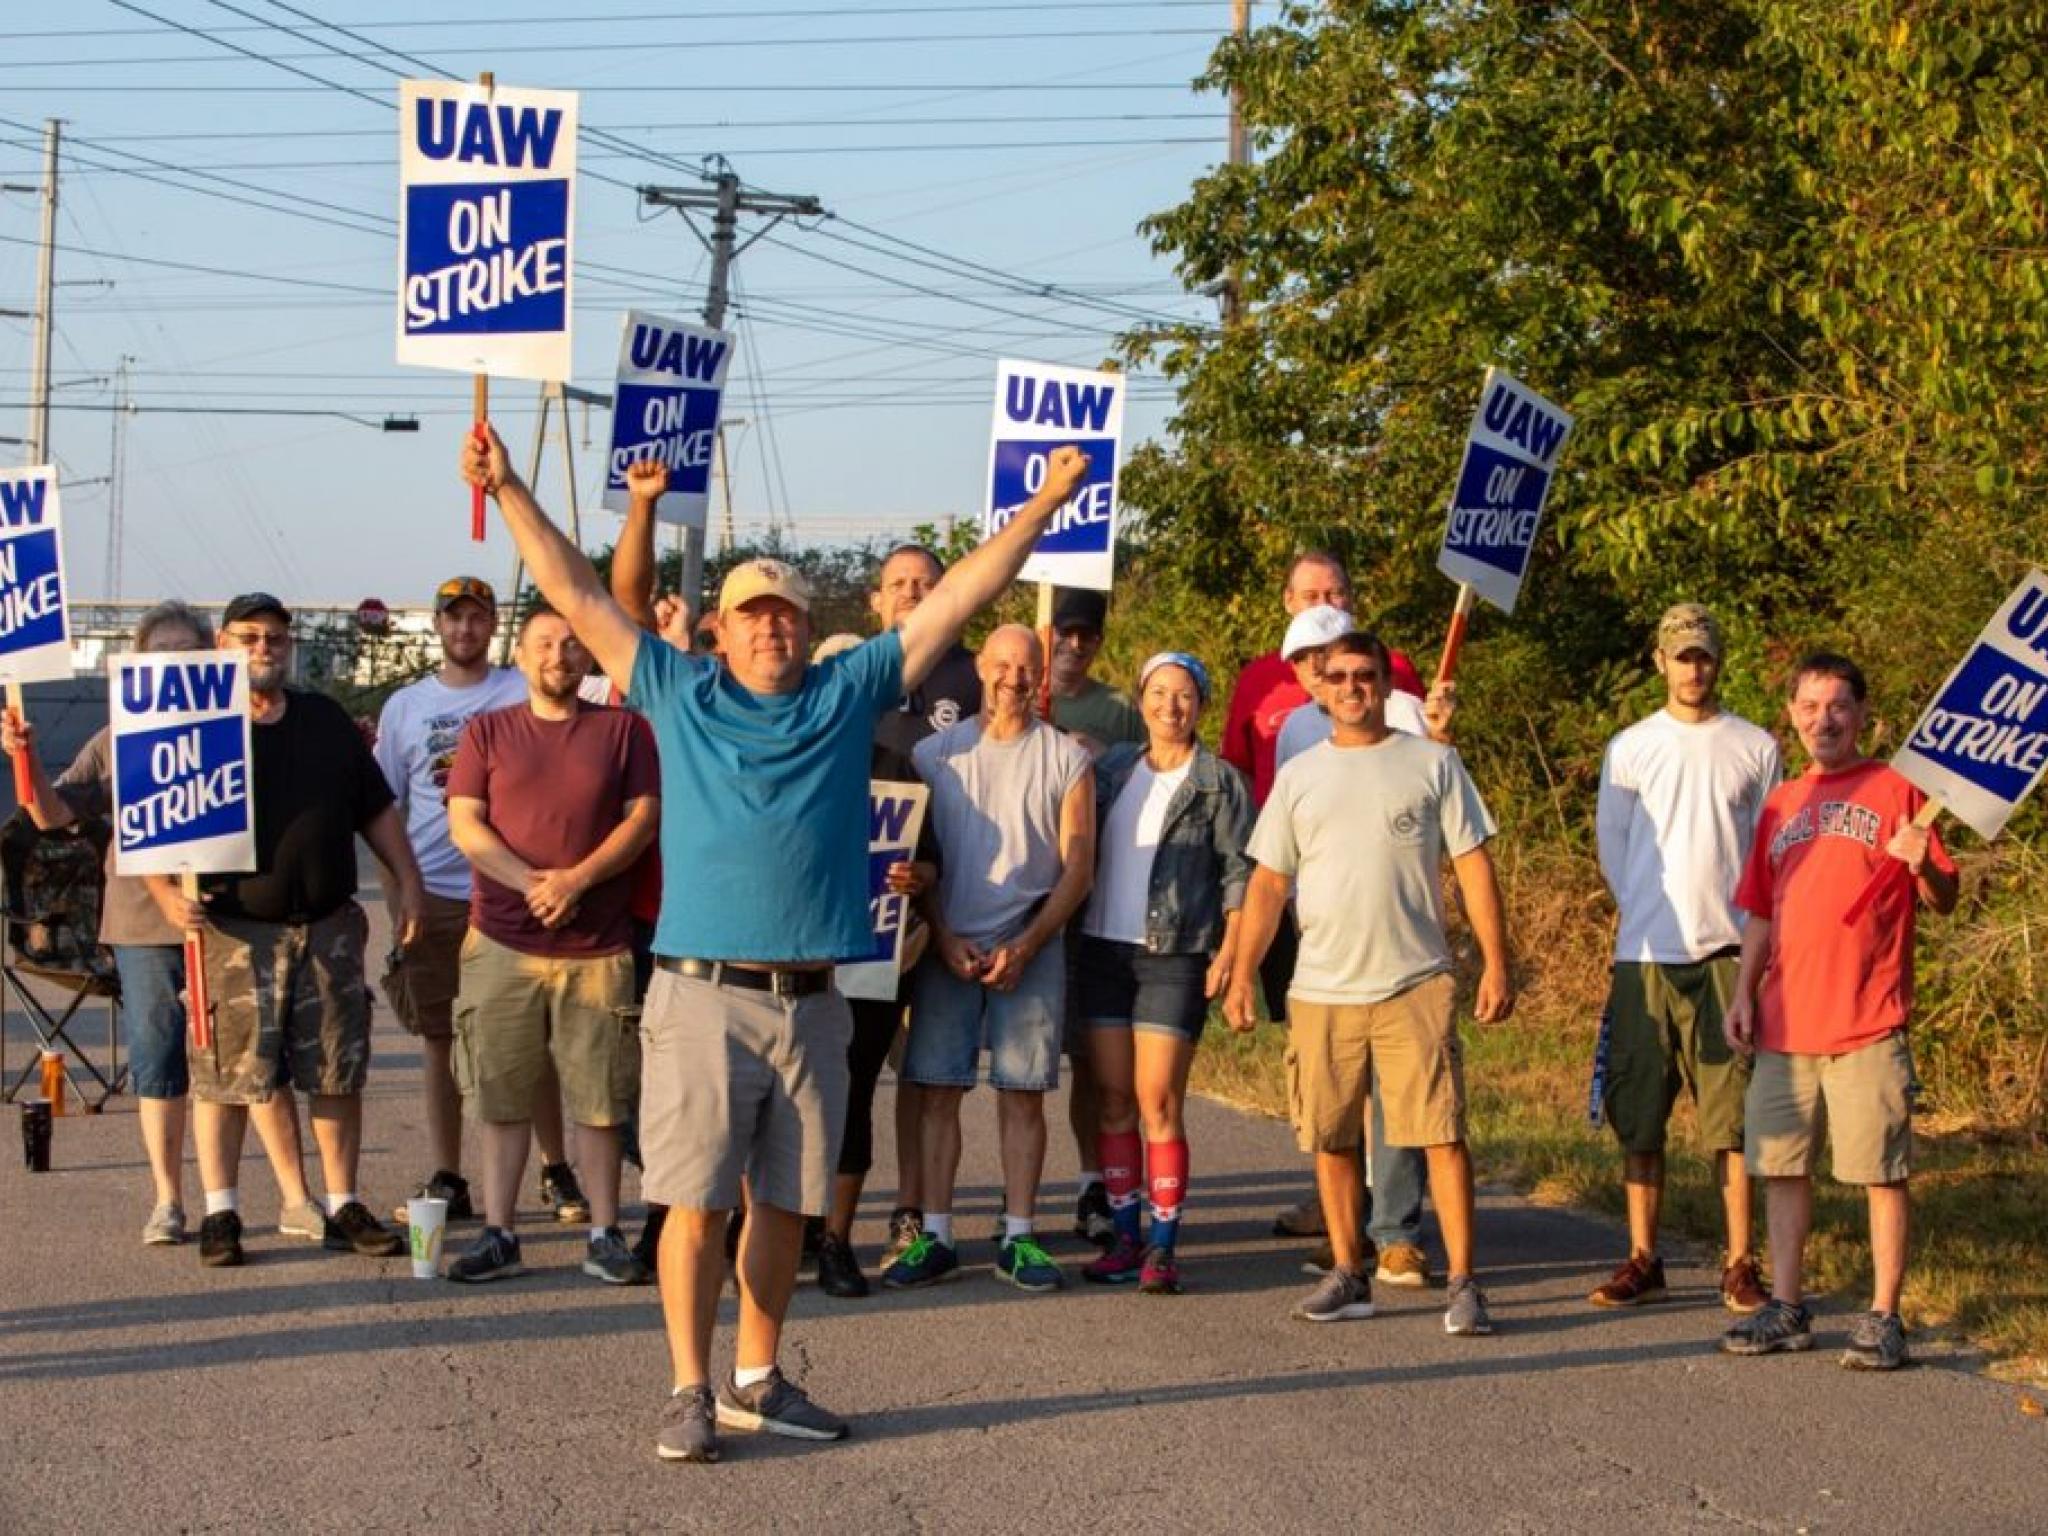  uaw-gains-traction-in-volkswagen-tennessee-plant-as-a-thousand-employees-sign-union-authorization-cards 